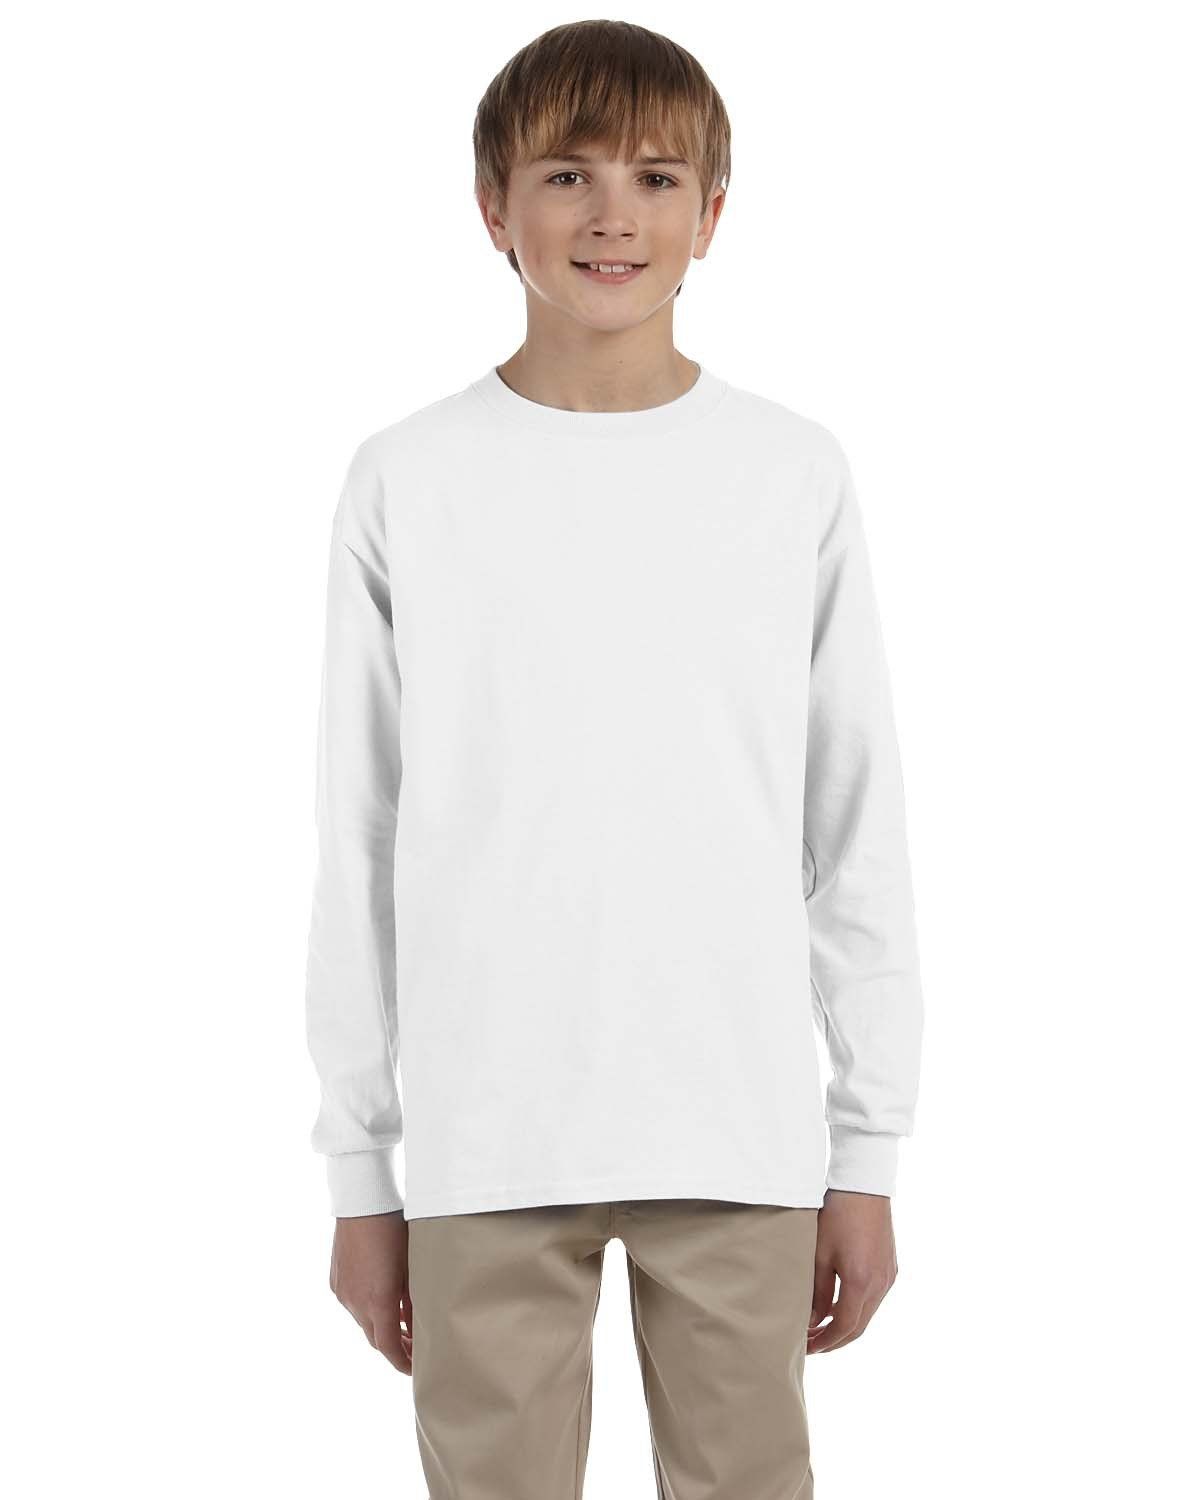 'Jerzees 29BL Youth Dri-Power Active 50/50 Cotton/Poly Long Sleeve T-Shirt'